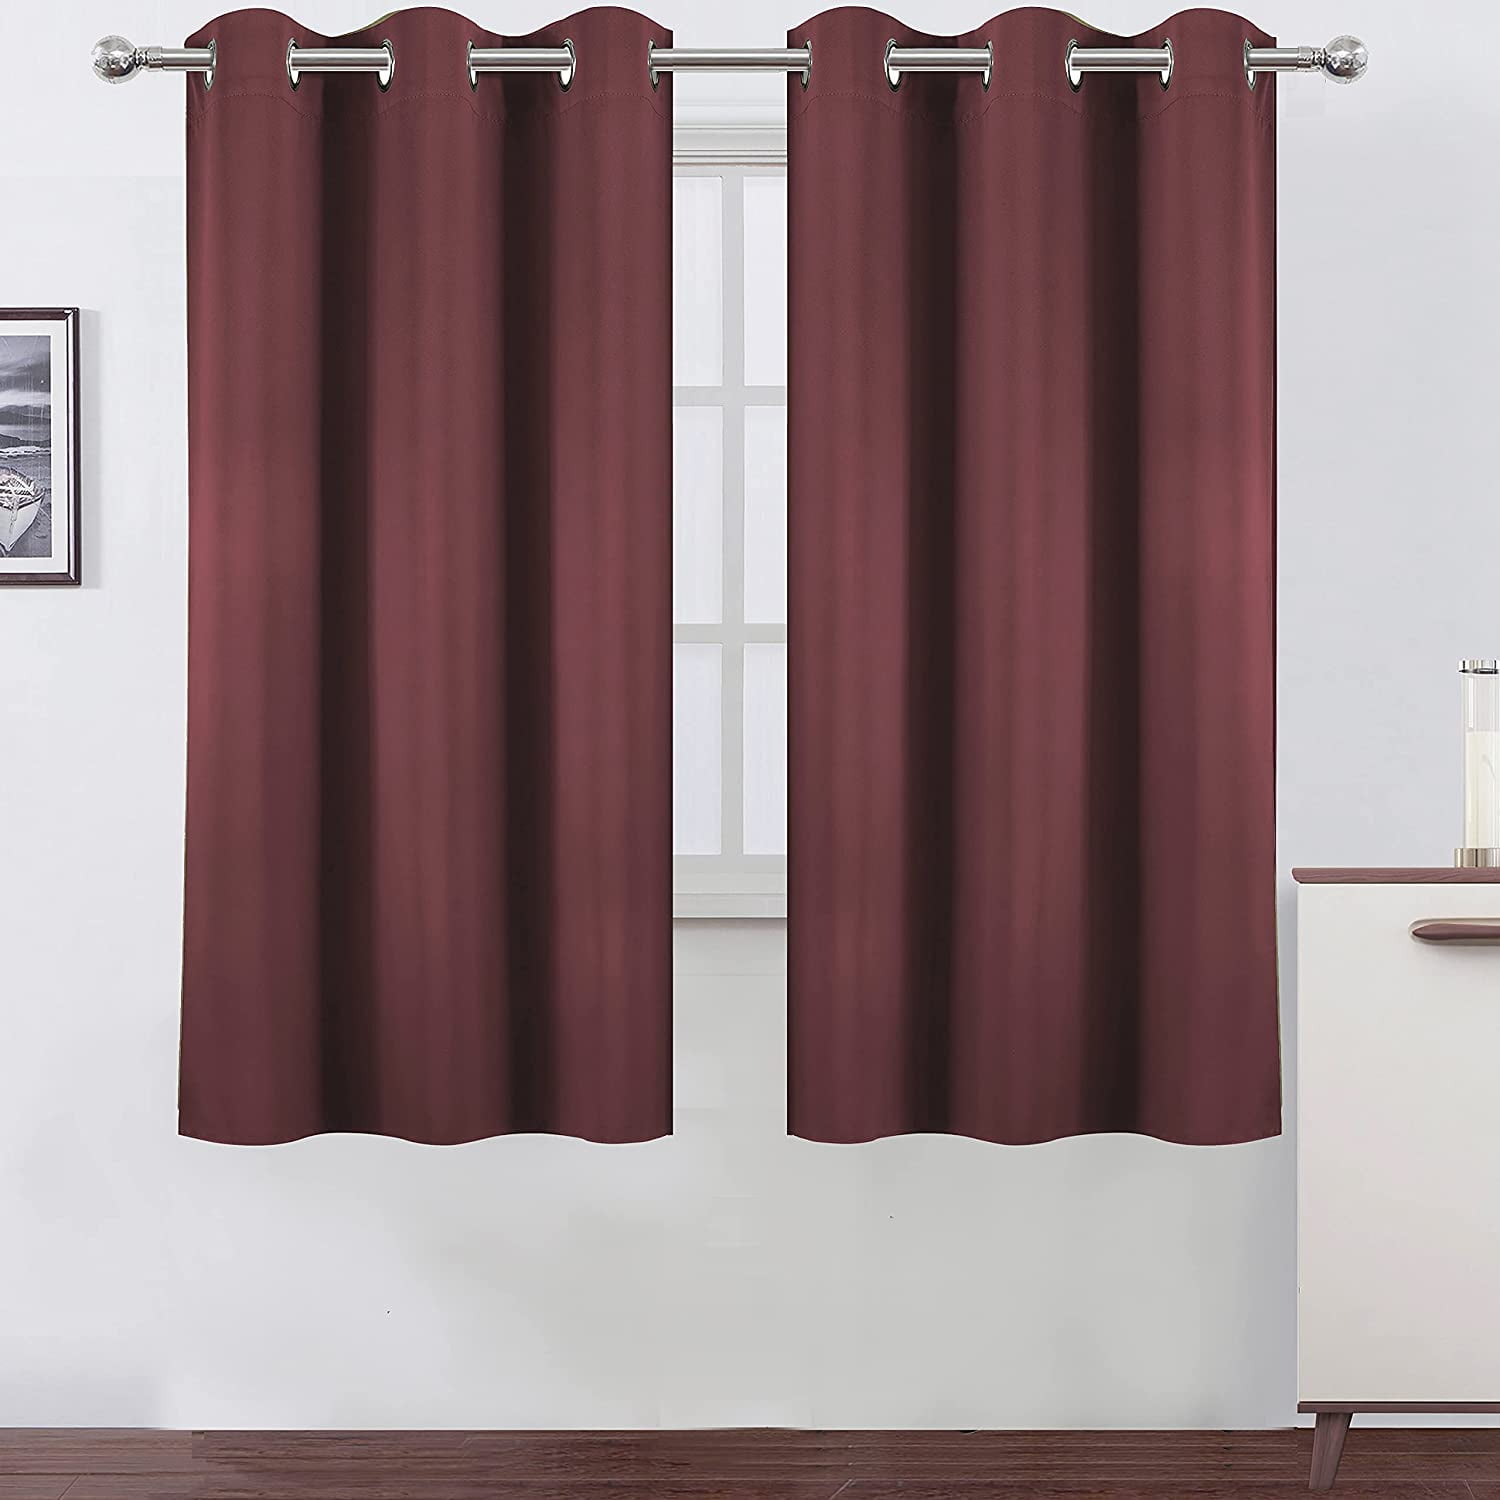 Blackout Curtains for Bedroom-Thermal Insulated Room Darkening Burgundy Solid 